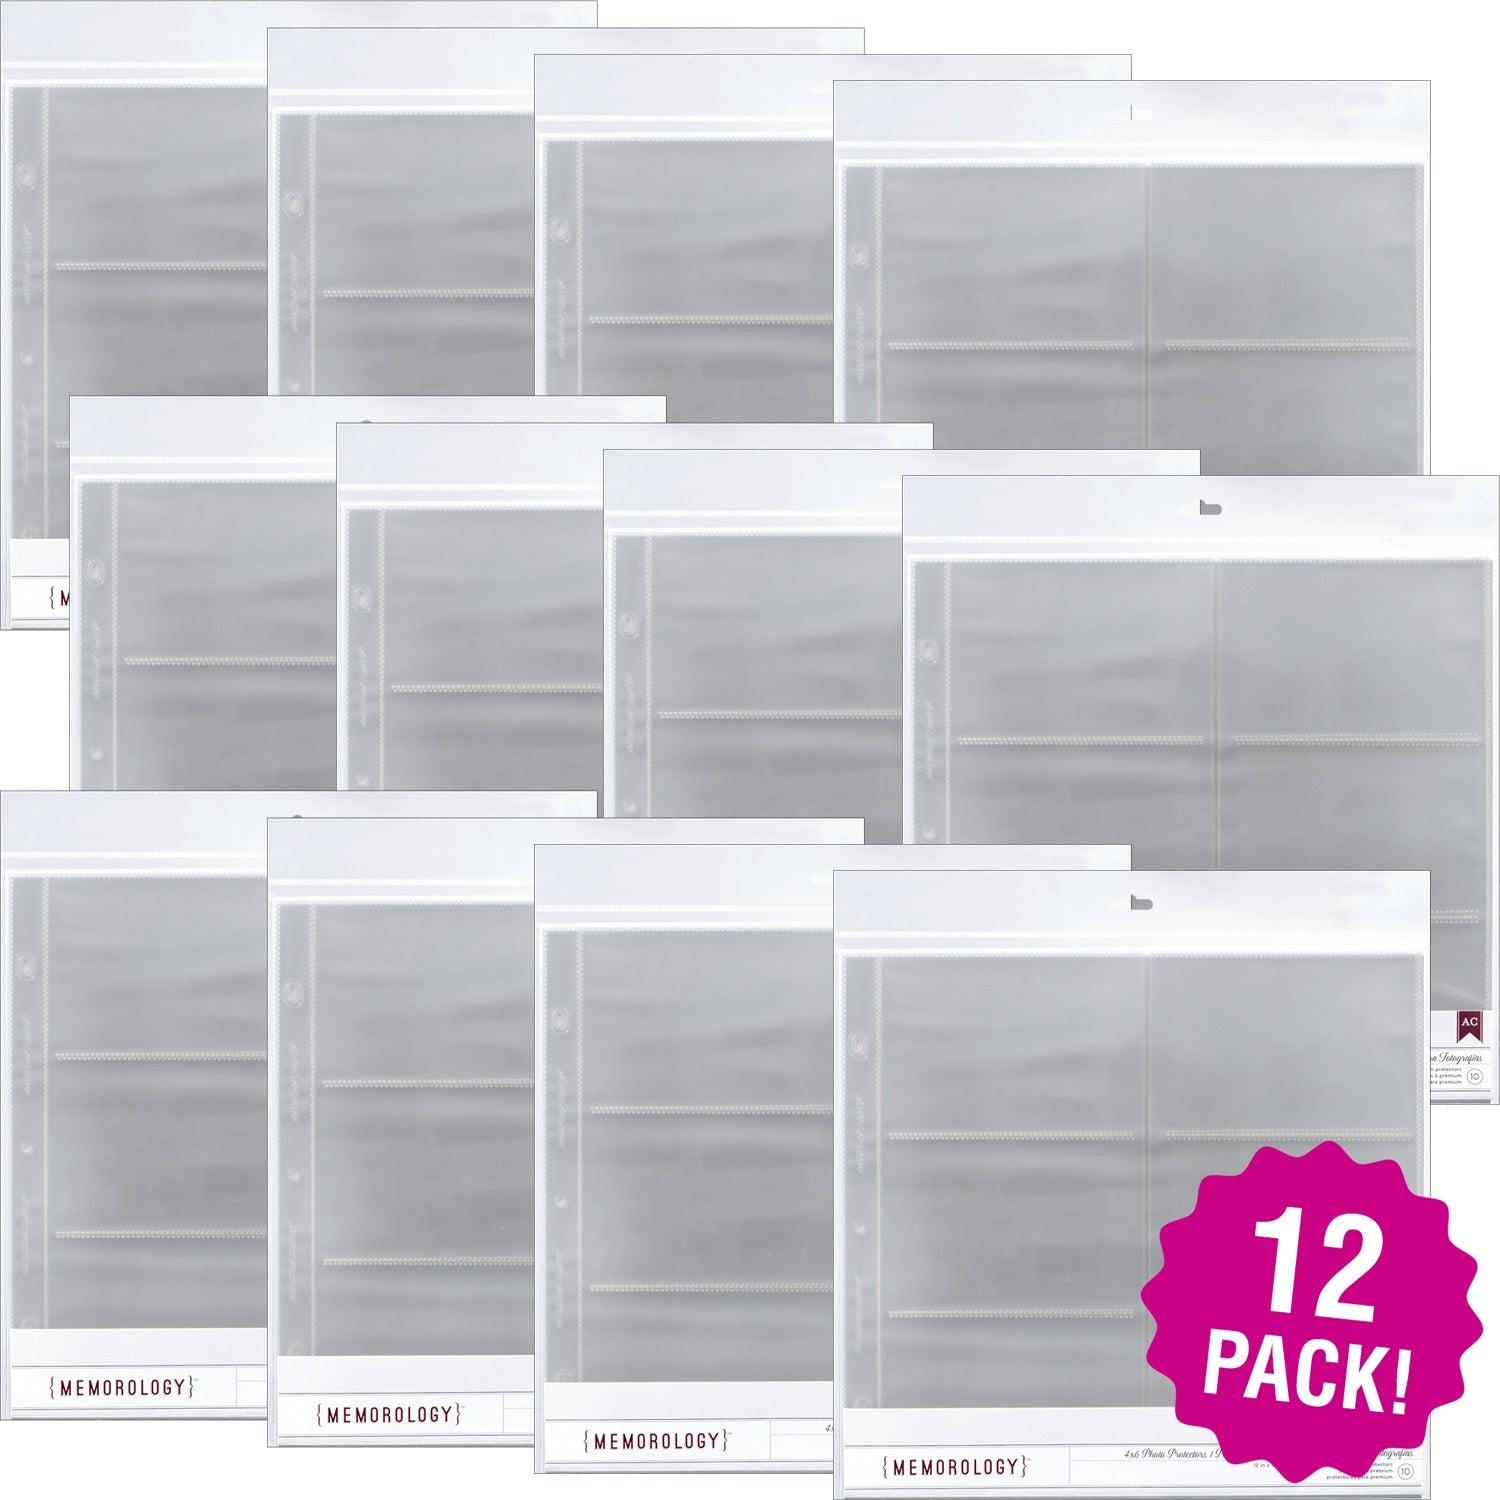 American Crafts Page Protectors Top-Loading 12X12 10/Pkg-(1) 12X12